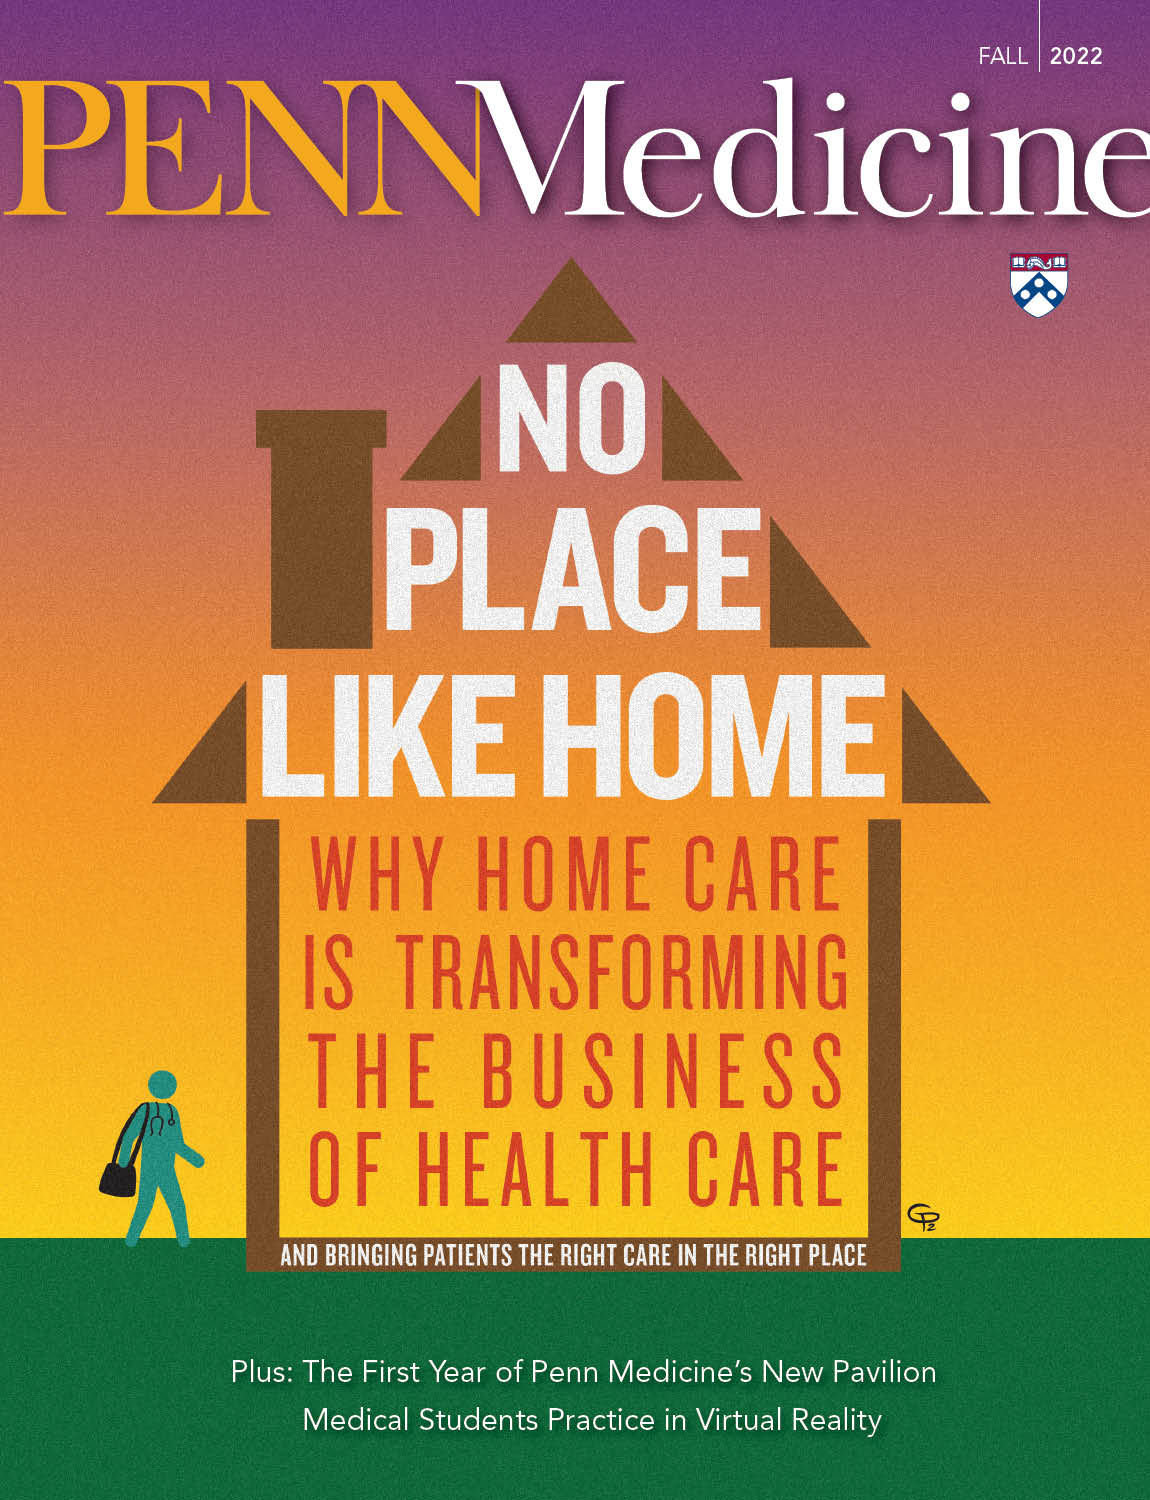 Cover image of the Fall/Winter 2022 issue of Penn Medicine magazine